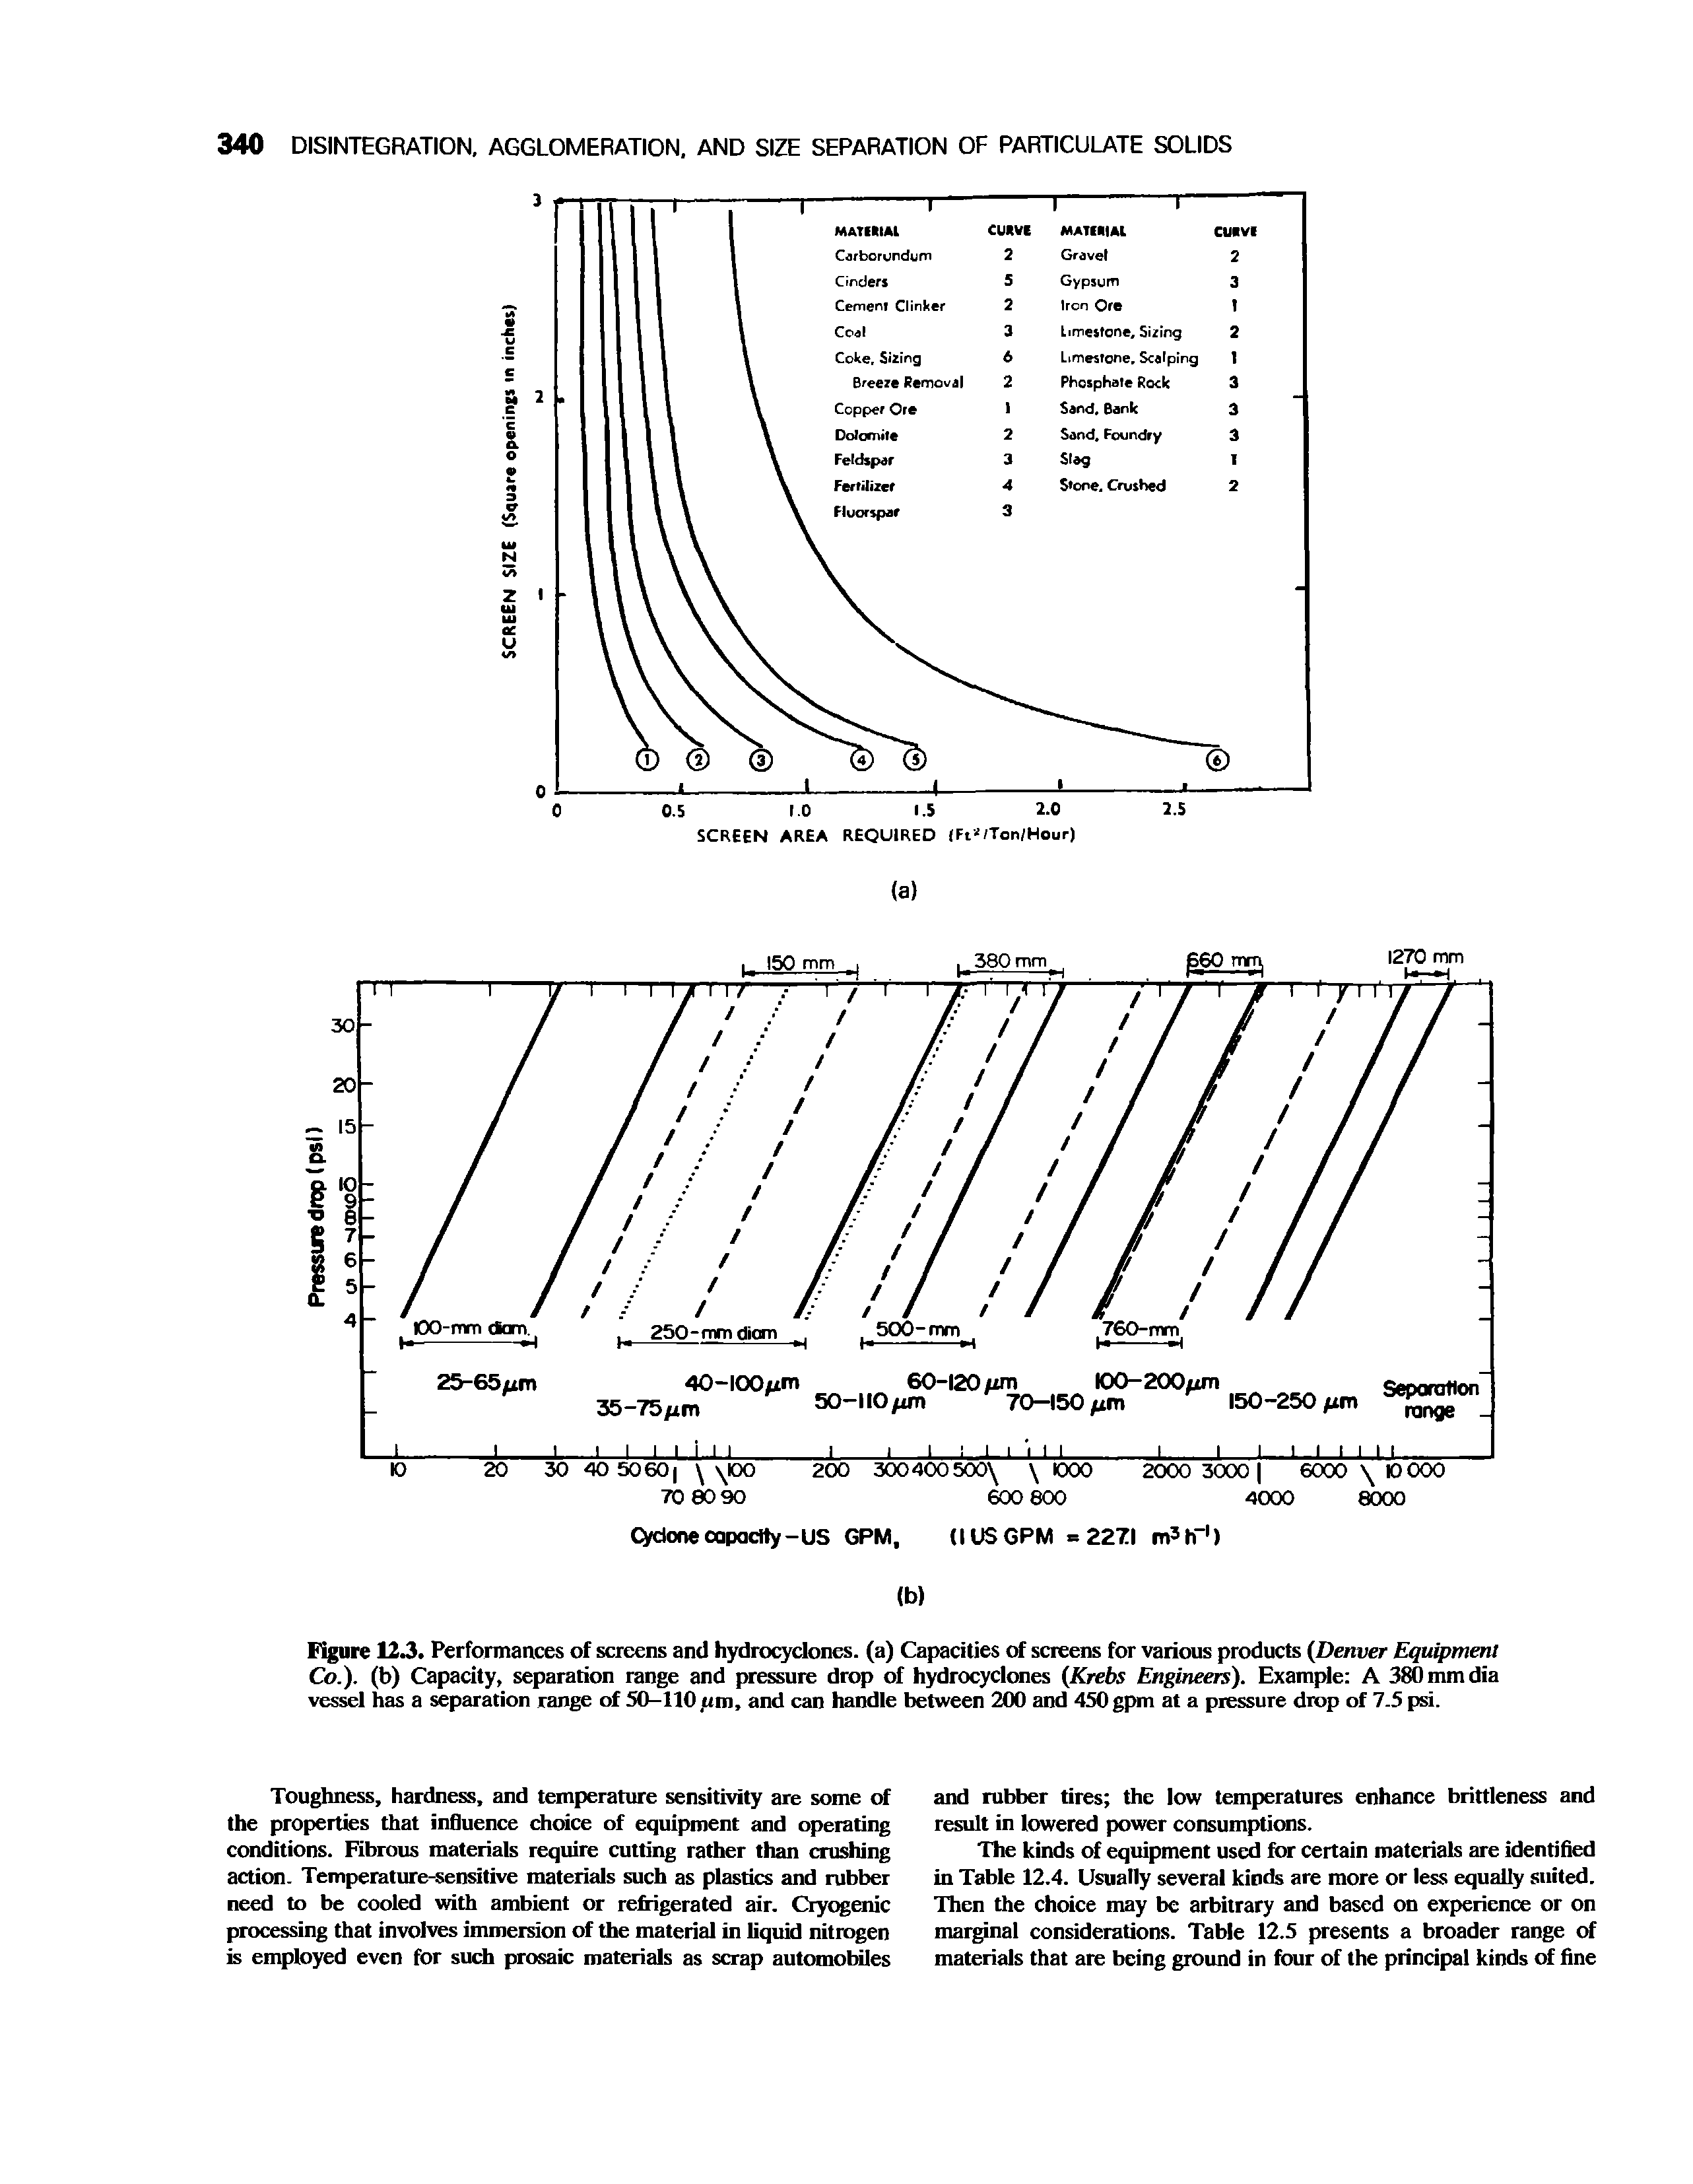 Figure 12.3. Performances of screens and hydrocyclones, (a) Capacities of screens for various products (Denver Equipment Co.), (b) Capacity, separation range and pressure drop of hydrocyclones (Krebs Engineers). Example A 380mmdia vessel has a separation range of 50-110 um, and can handle between 200 and 450 gpm at a pressure drop of 7.5 psi.